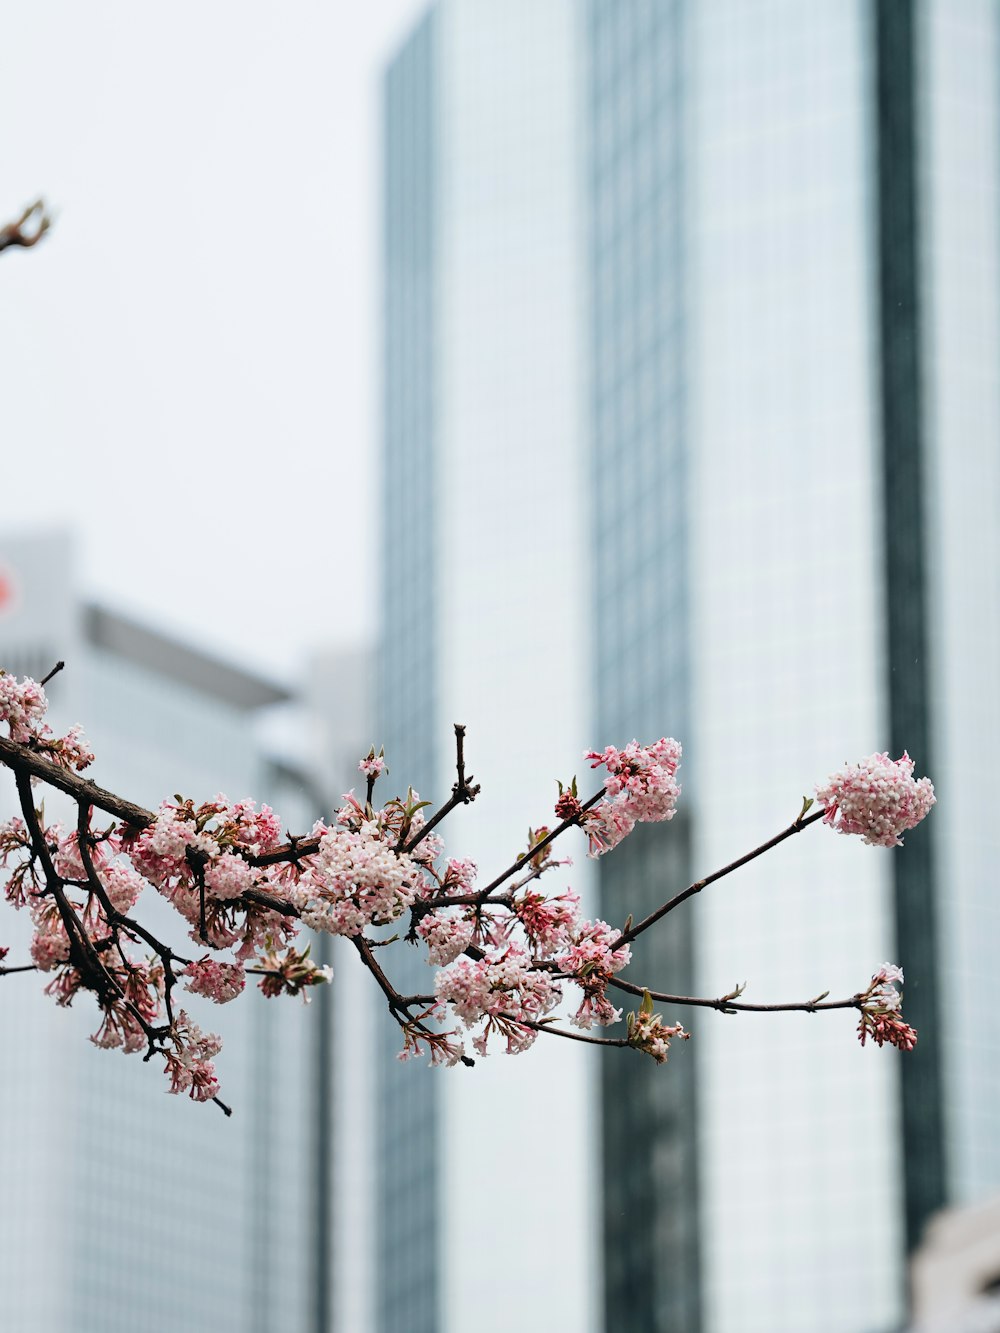 a branch with pink flowers in front of tall buildings